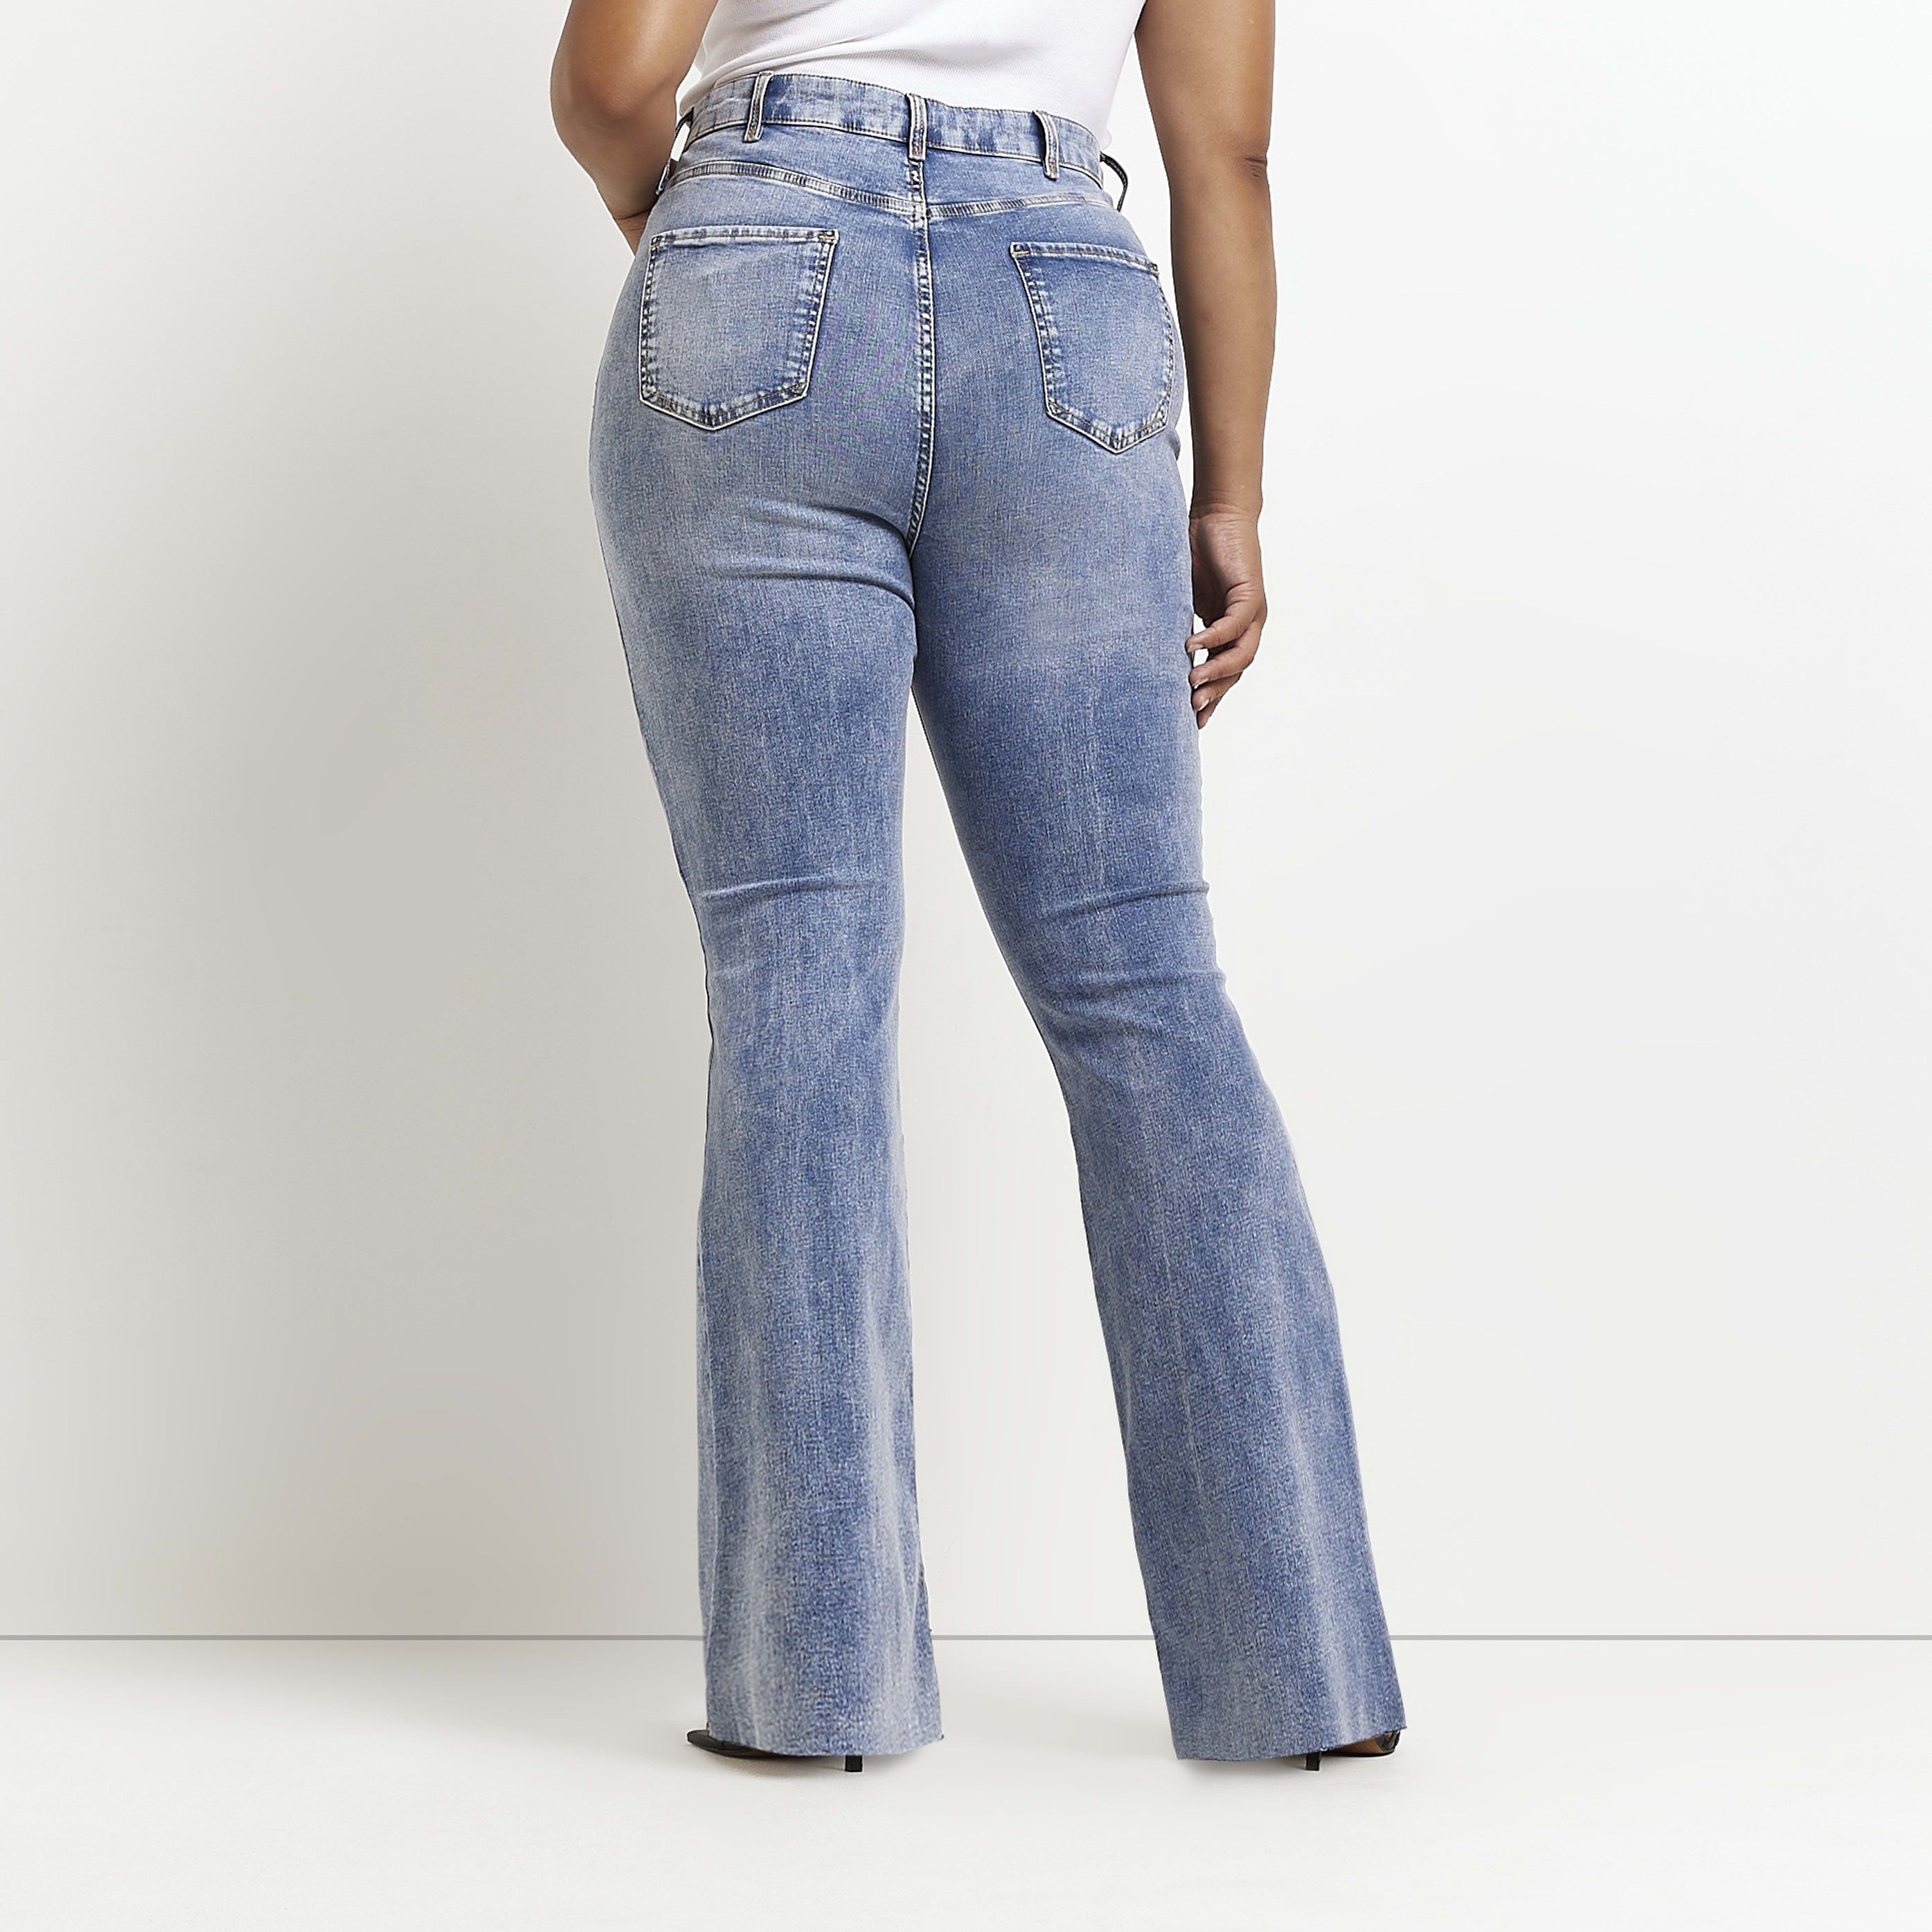 > Brand: River Island> Department: Women> Colour: Denim> Type: Jeans> Style: Straight> Size Type: Plus> Fit: Regular> Material Composition: 89% Cotton 10% Polyester 1% Elastane> Occasion: Casual> Pattern: No Pattern> Closure: Button> Material: Cotton Blend> Rise: High (Greater than 10.5 in)> Season: AW22